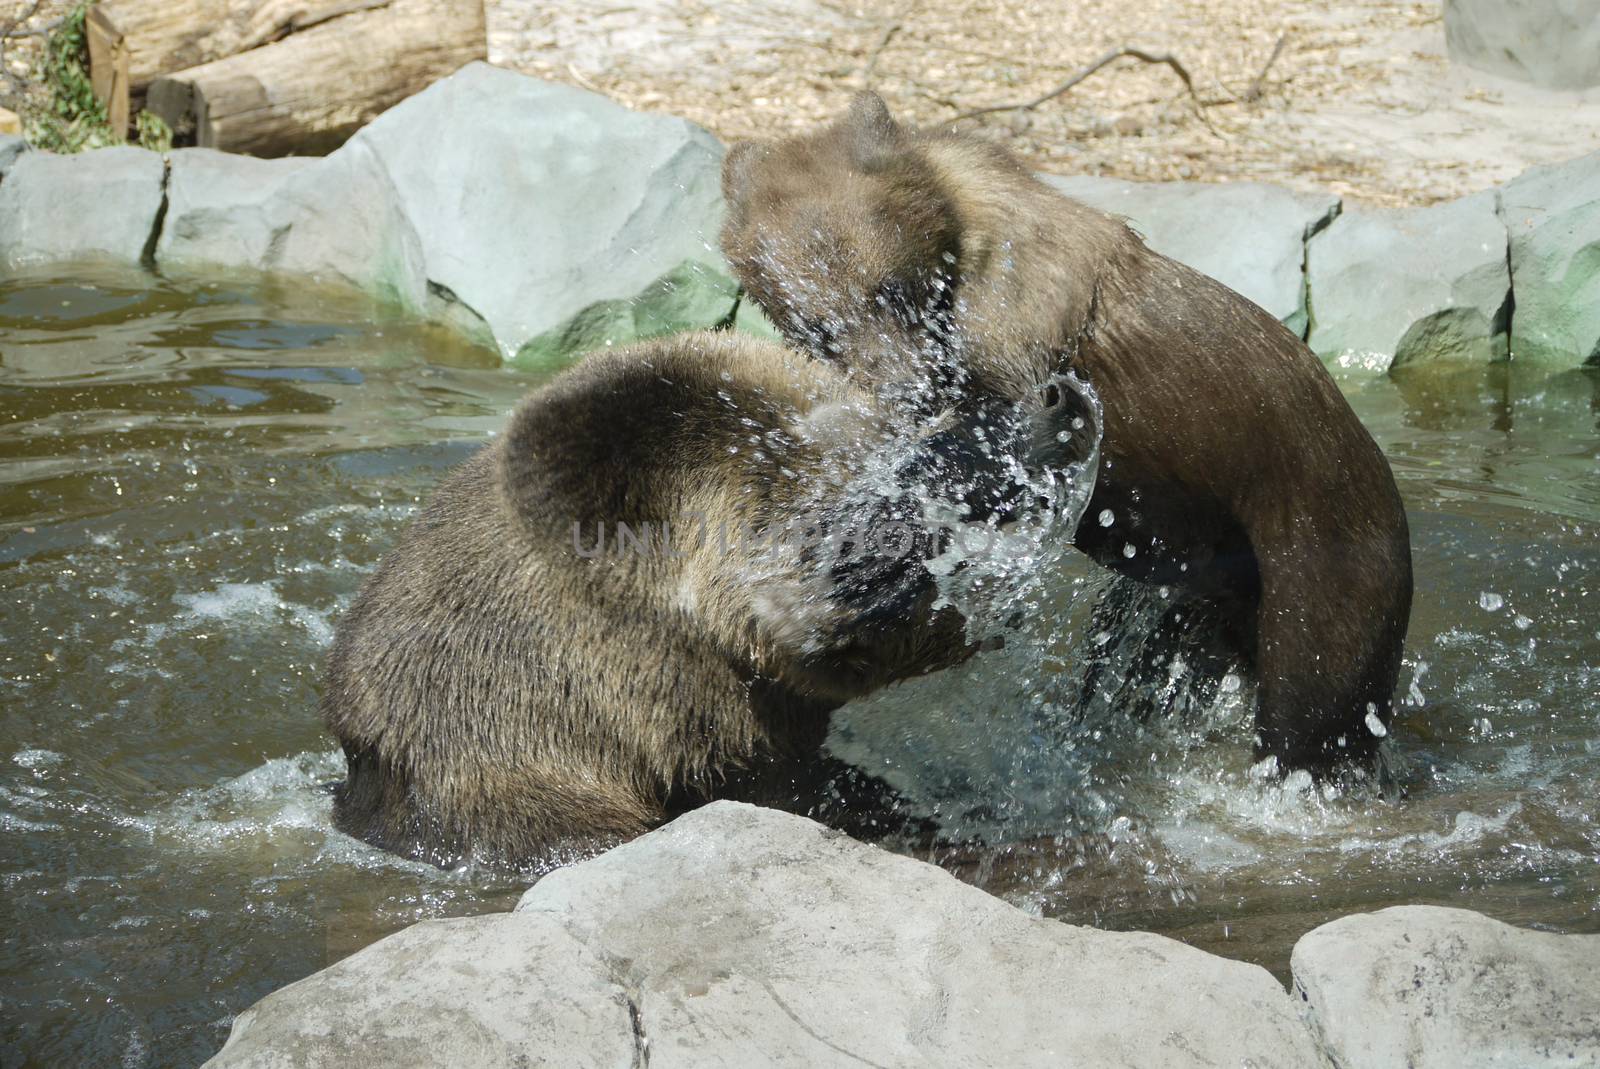 Bears are played with each other in the water against a background of stone blocks